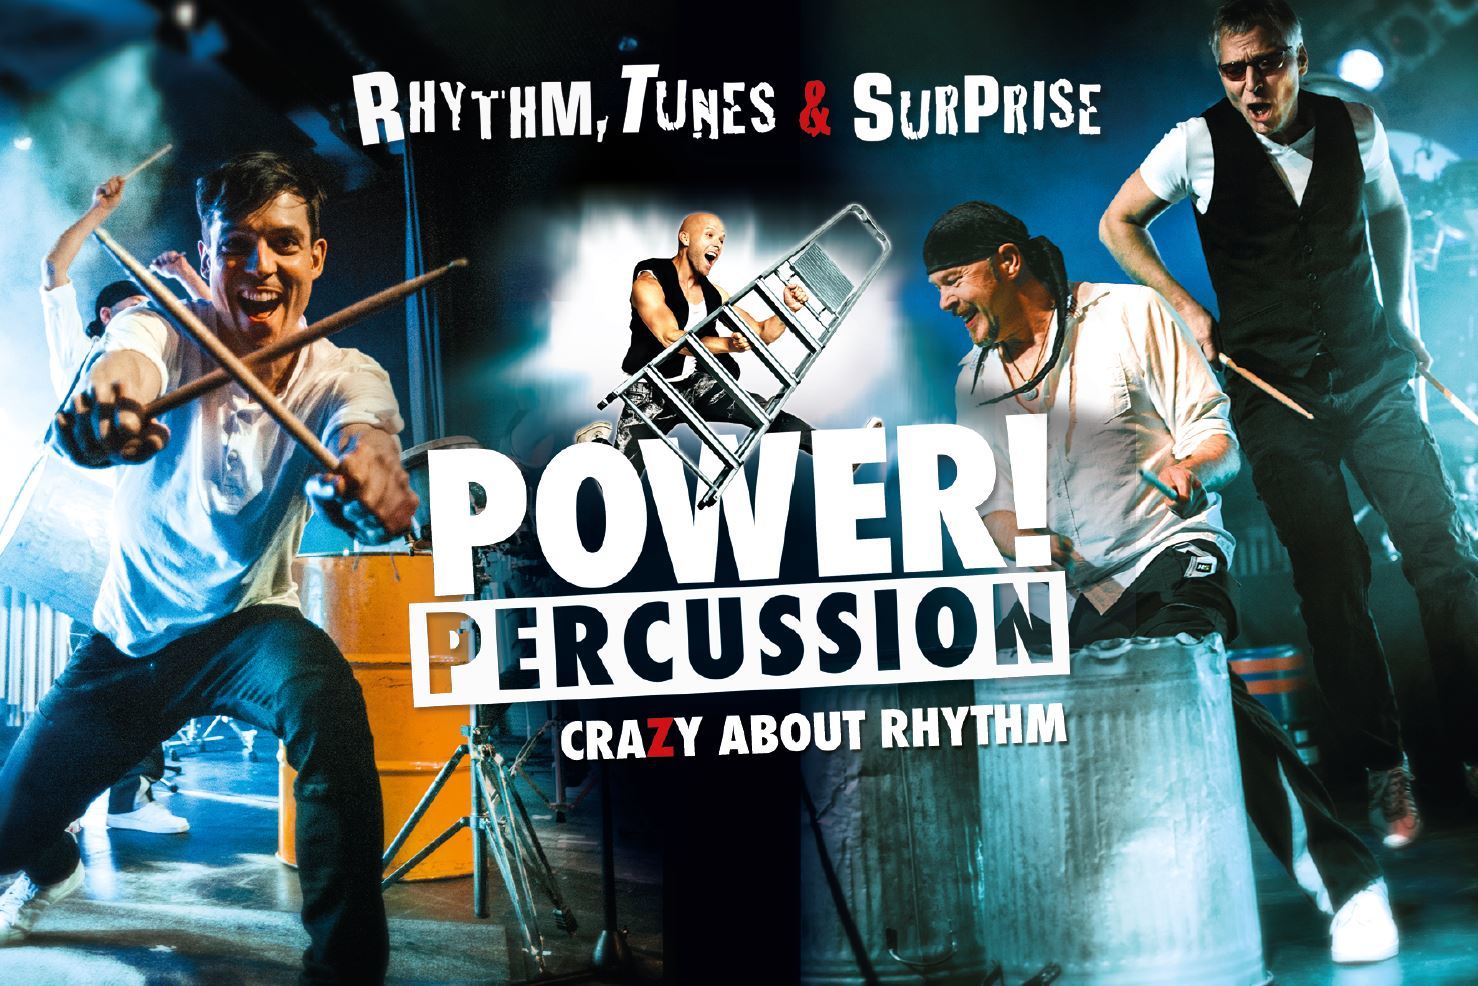 Power! Percussion